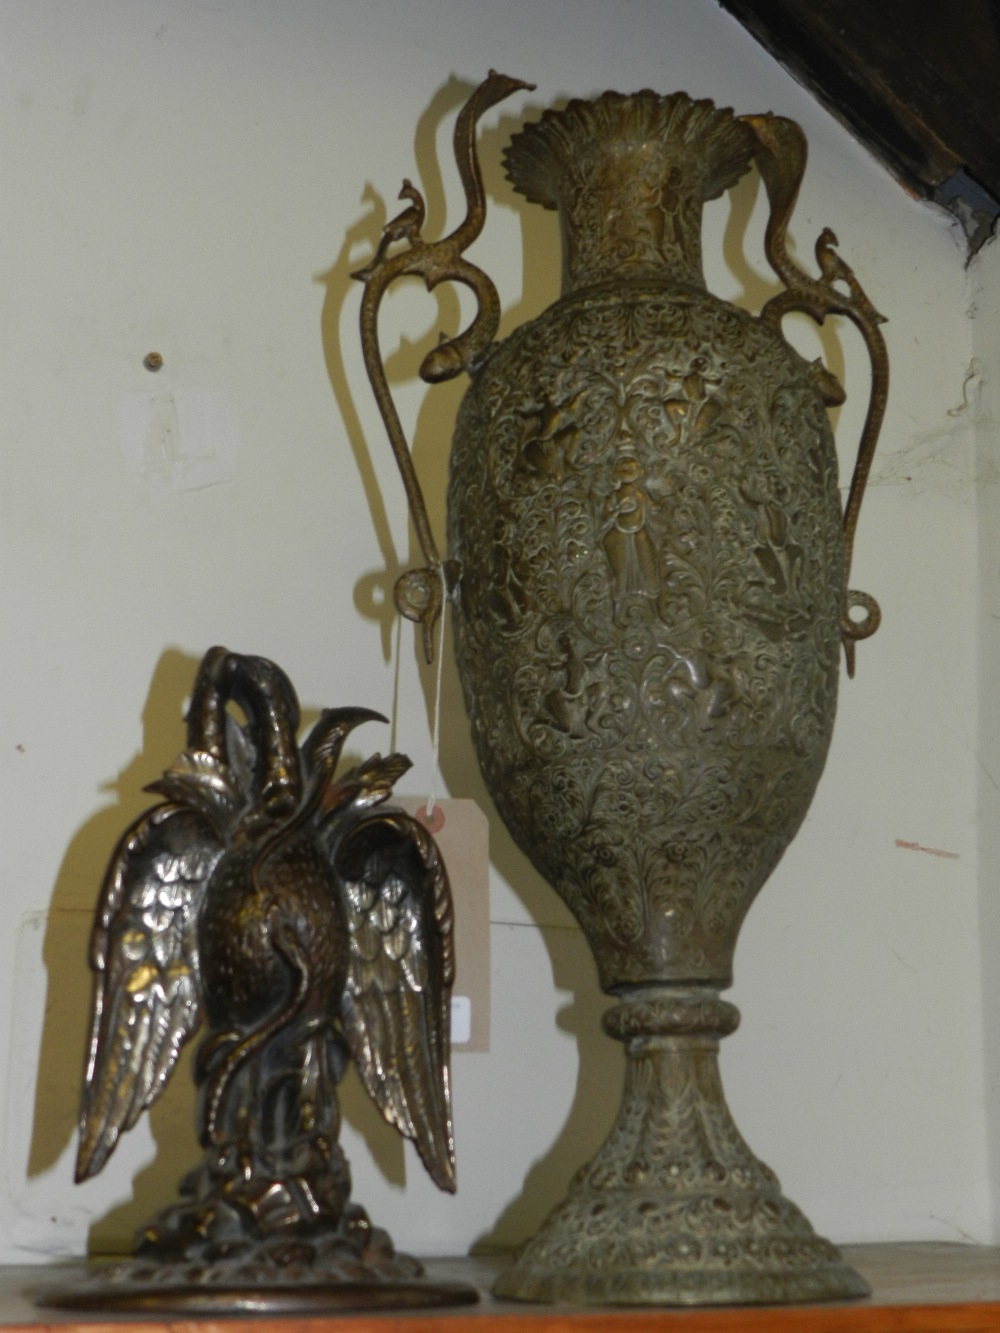 A large intricately tooled brass vase, along with a 19th century doorstop.